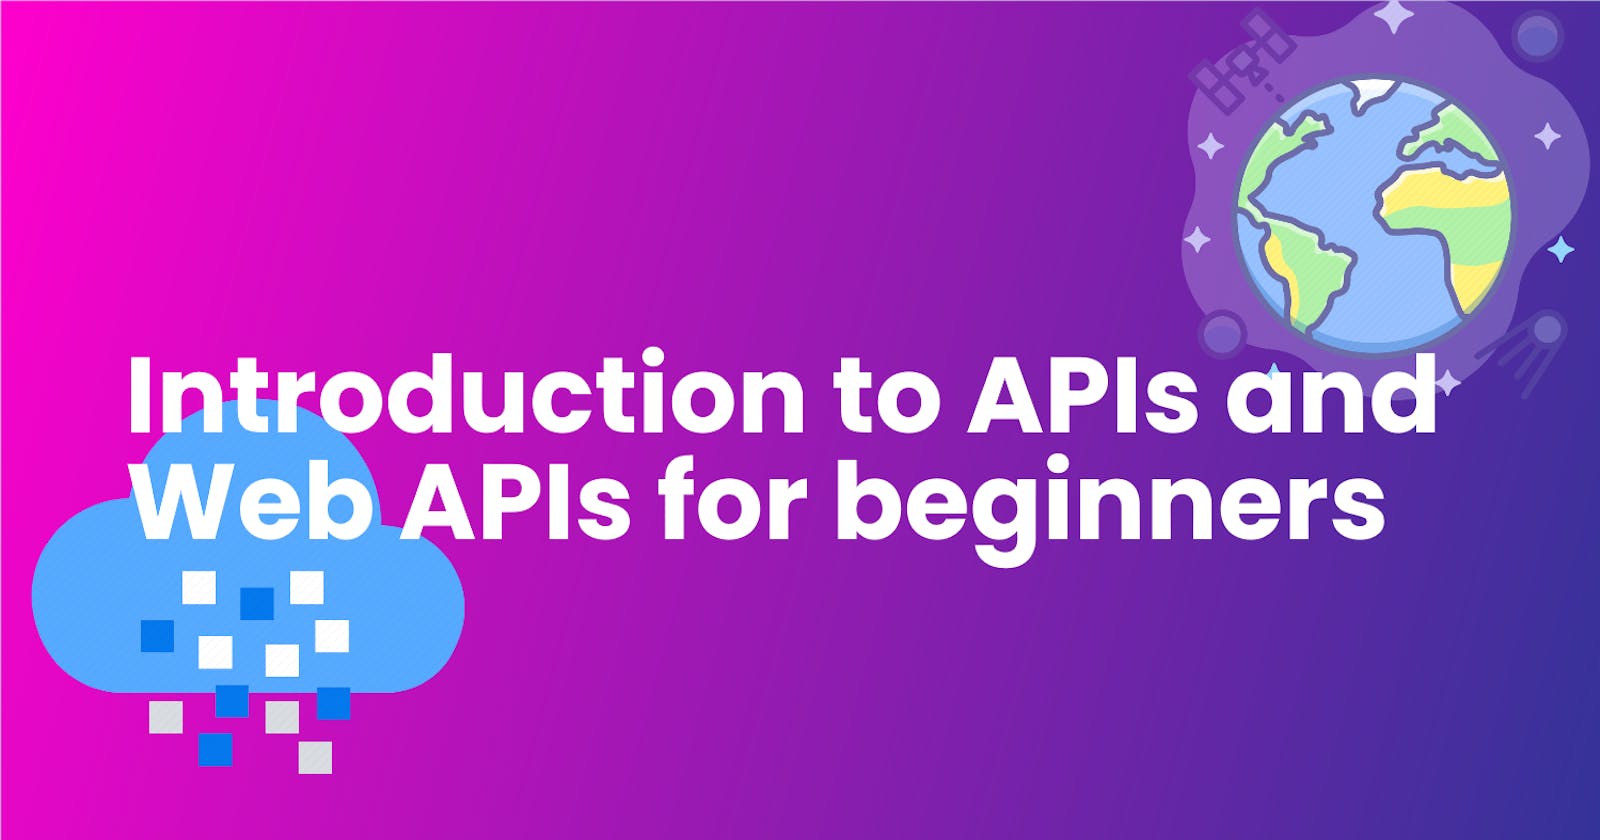 Introduction to APIs and Web APIs for beginners